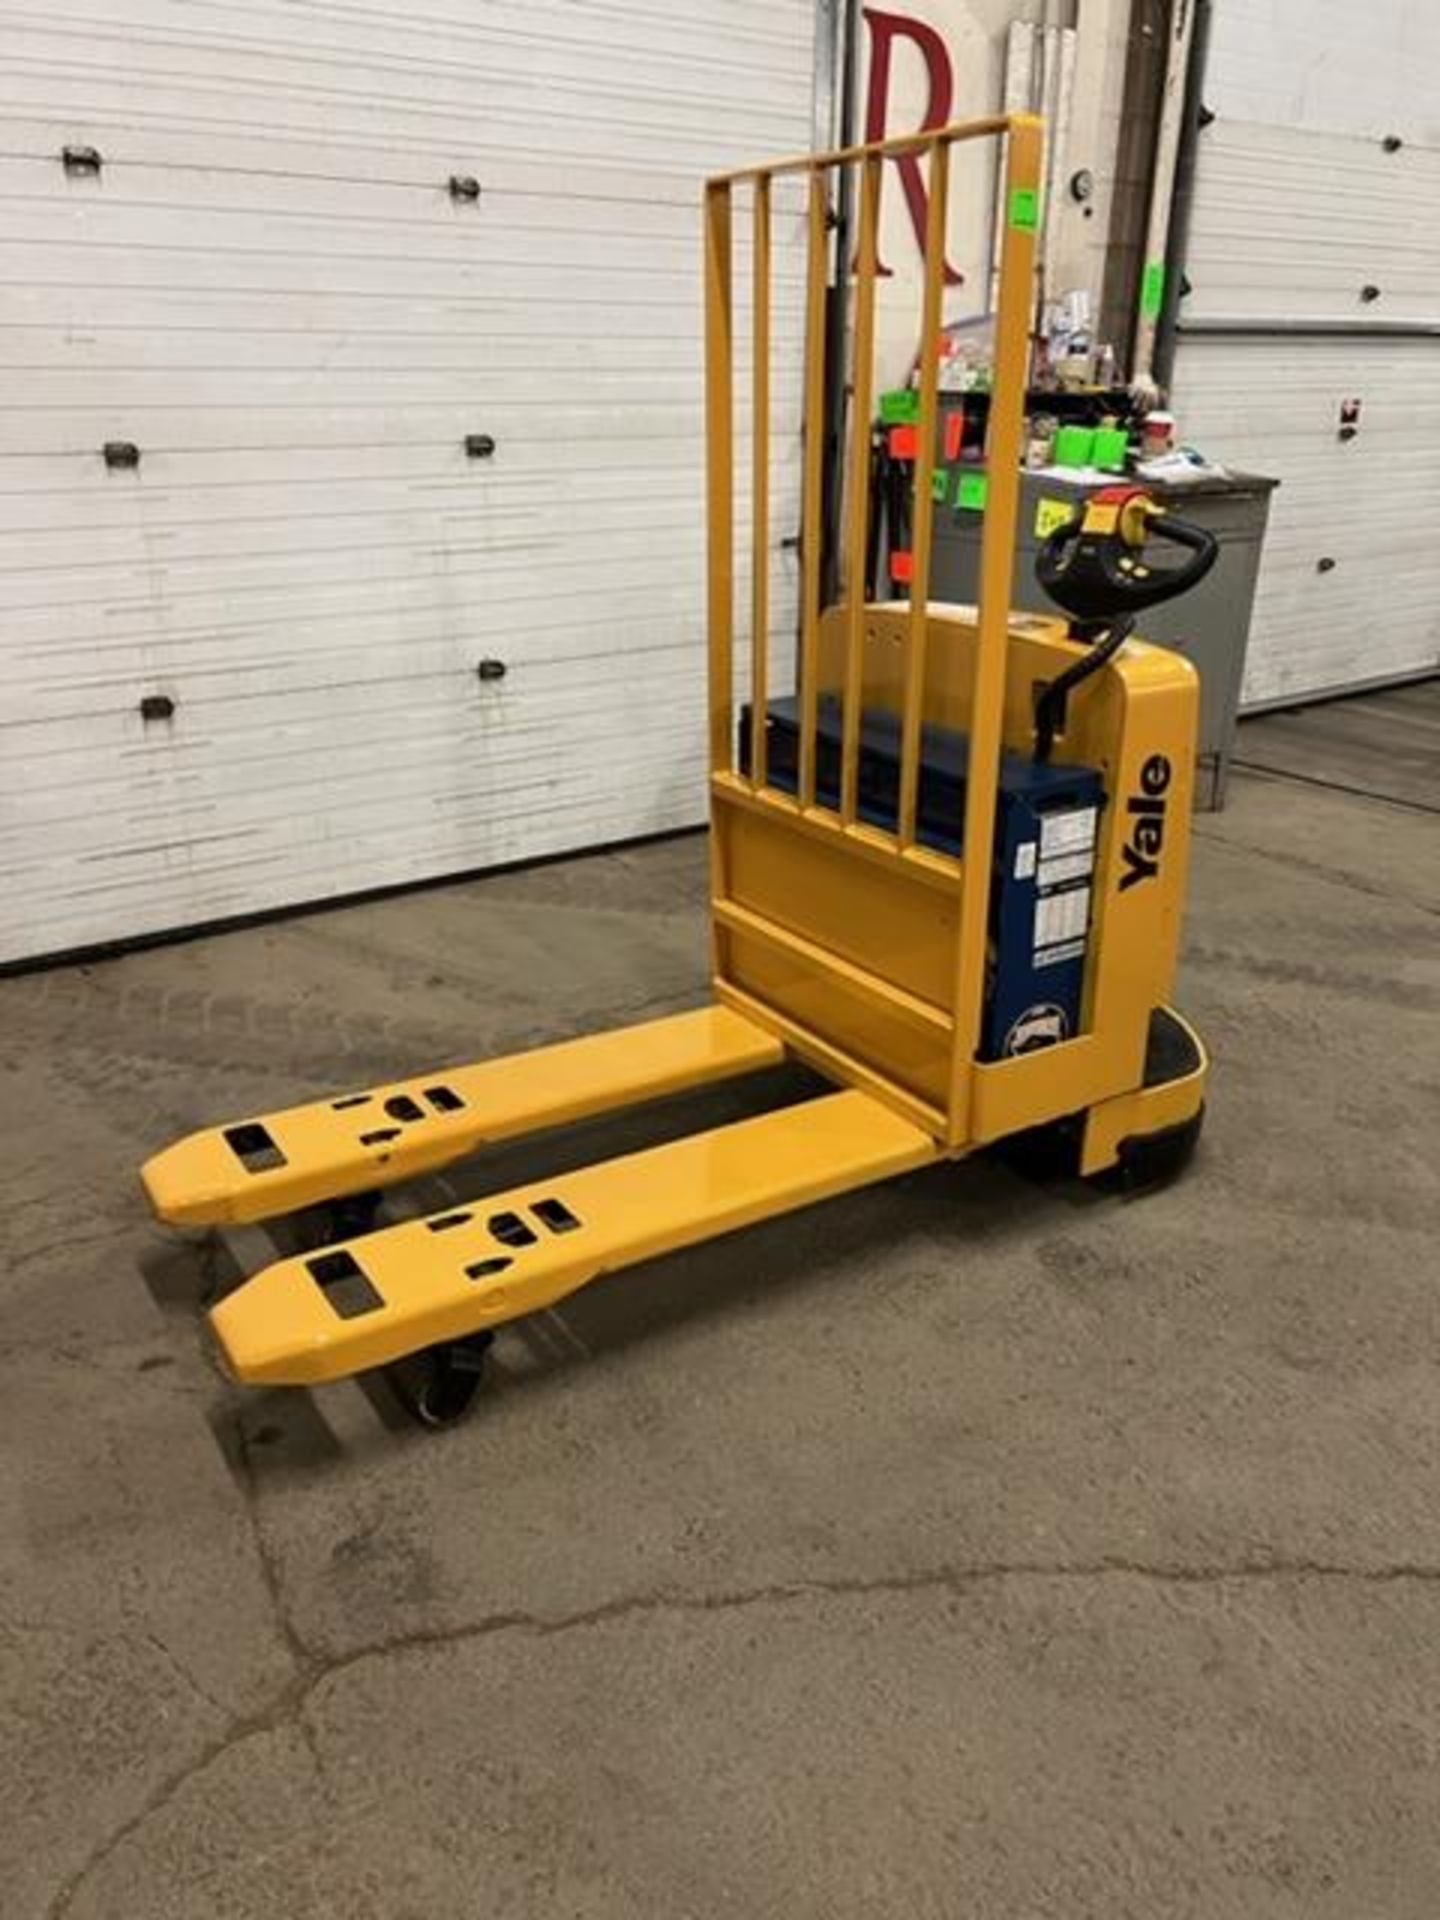 2005 Yale Walk Behind Walkie 6500lbs capacity Powered Pallet Cart Lift MINT UNIT with LOW HOURS - Image 2 of 3